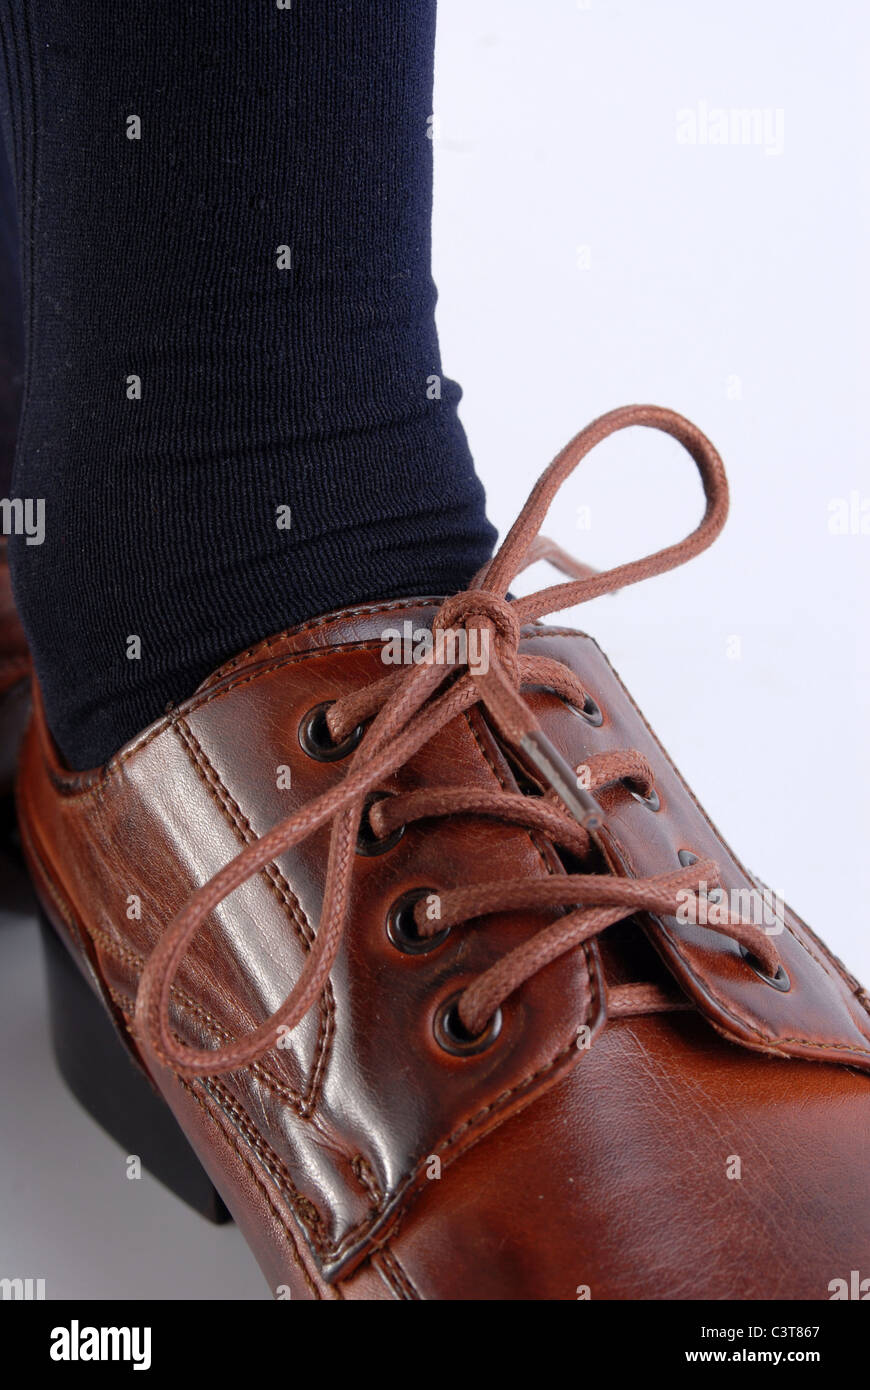 Close-up of a brown polished male shoe. Stock Photo